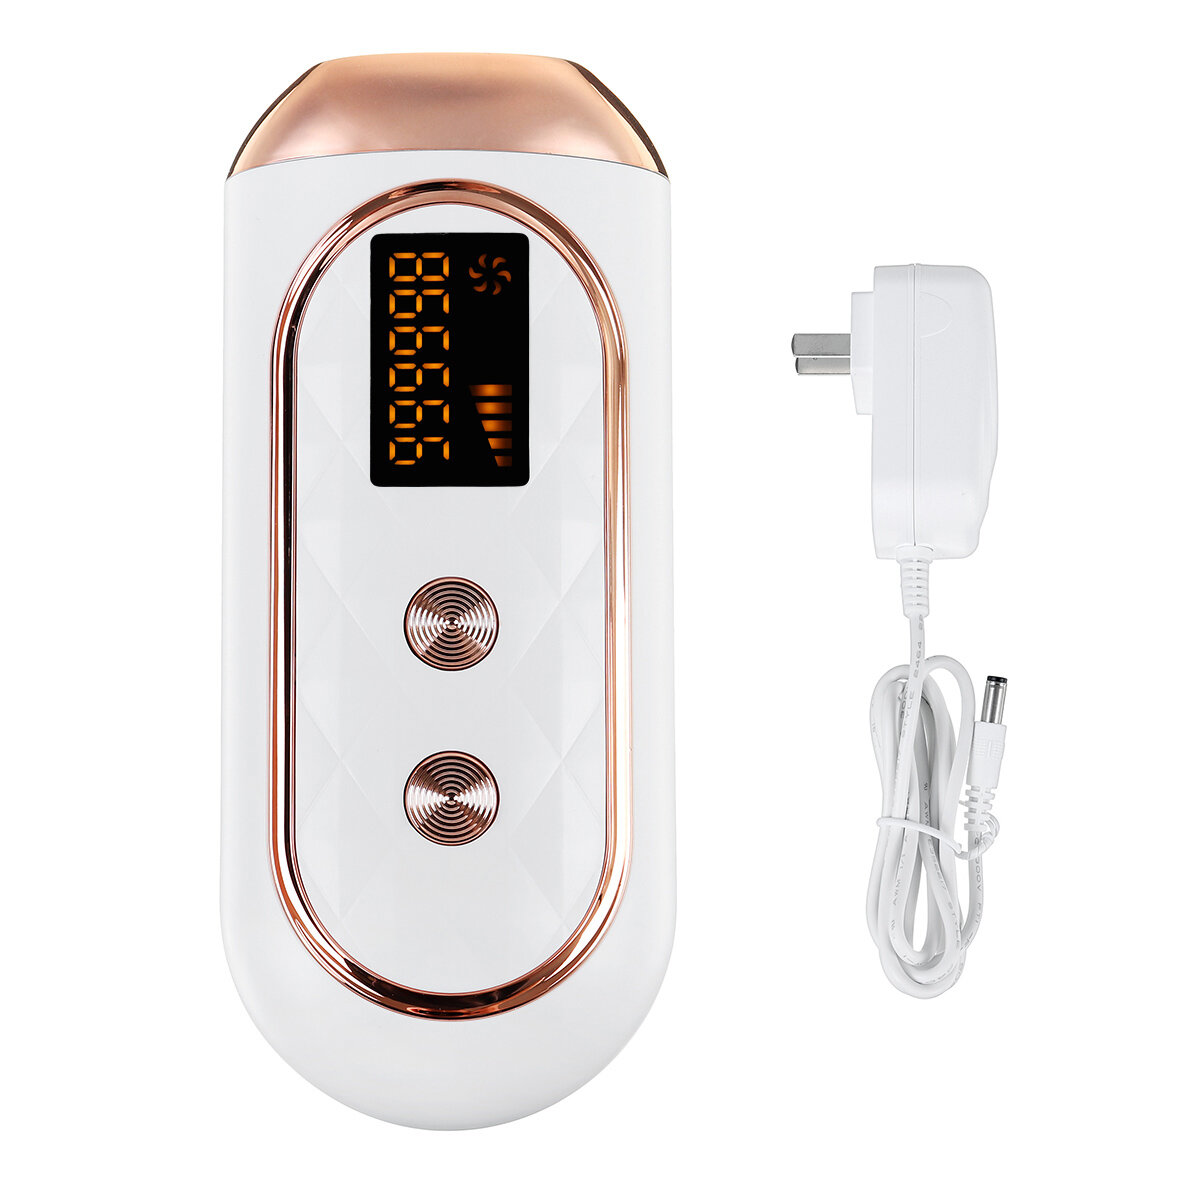 Image of 999999 Laser Painless Permanent IPL Hair Removal Epilator Portable Face Body Hair Remover